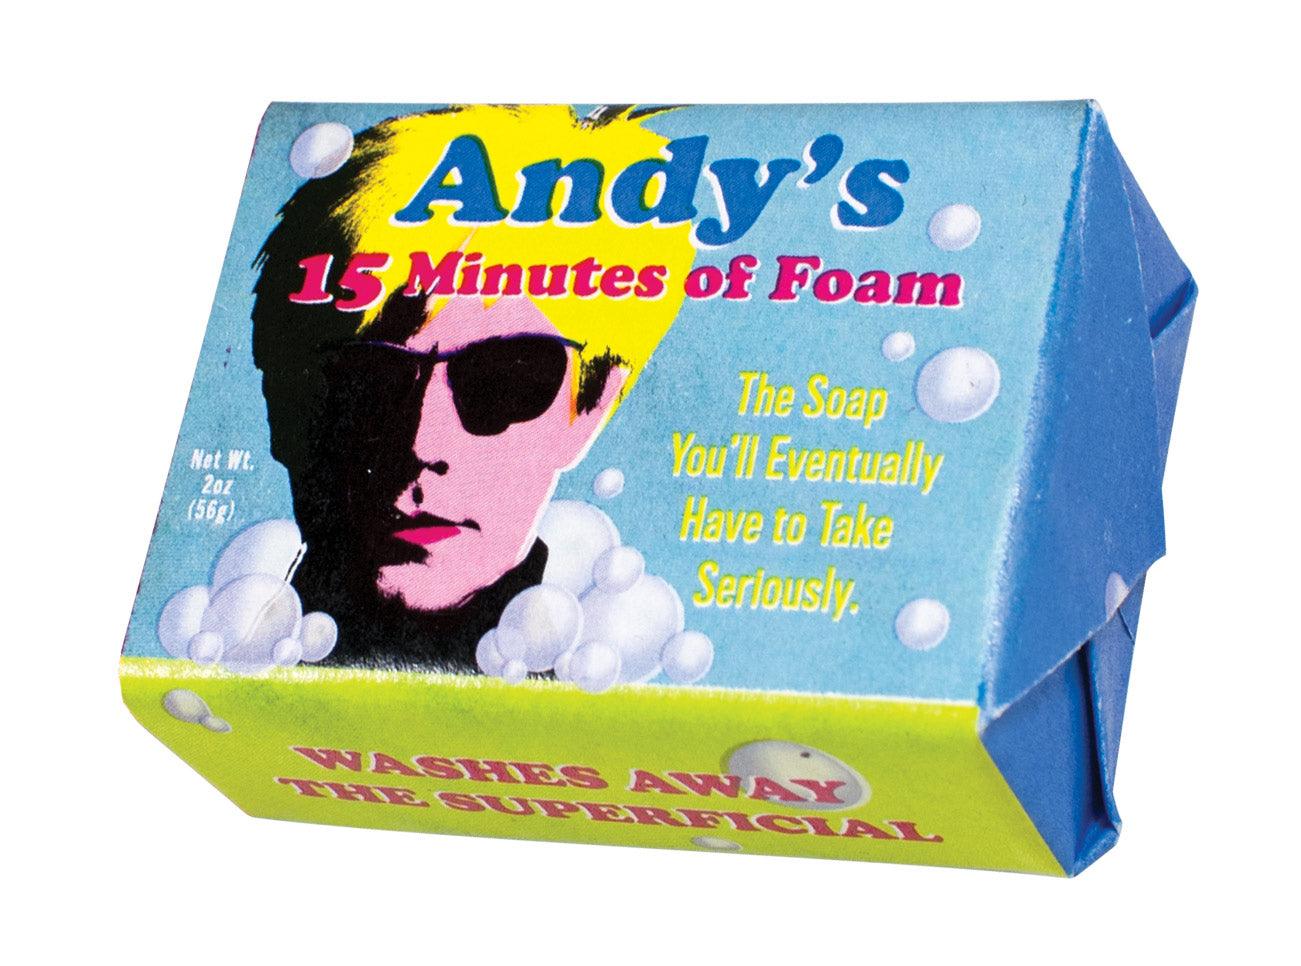 Andy’s 15 Minutes of Foam